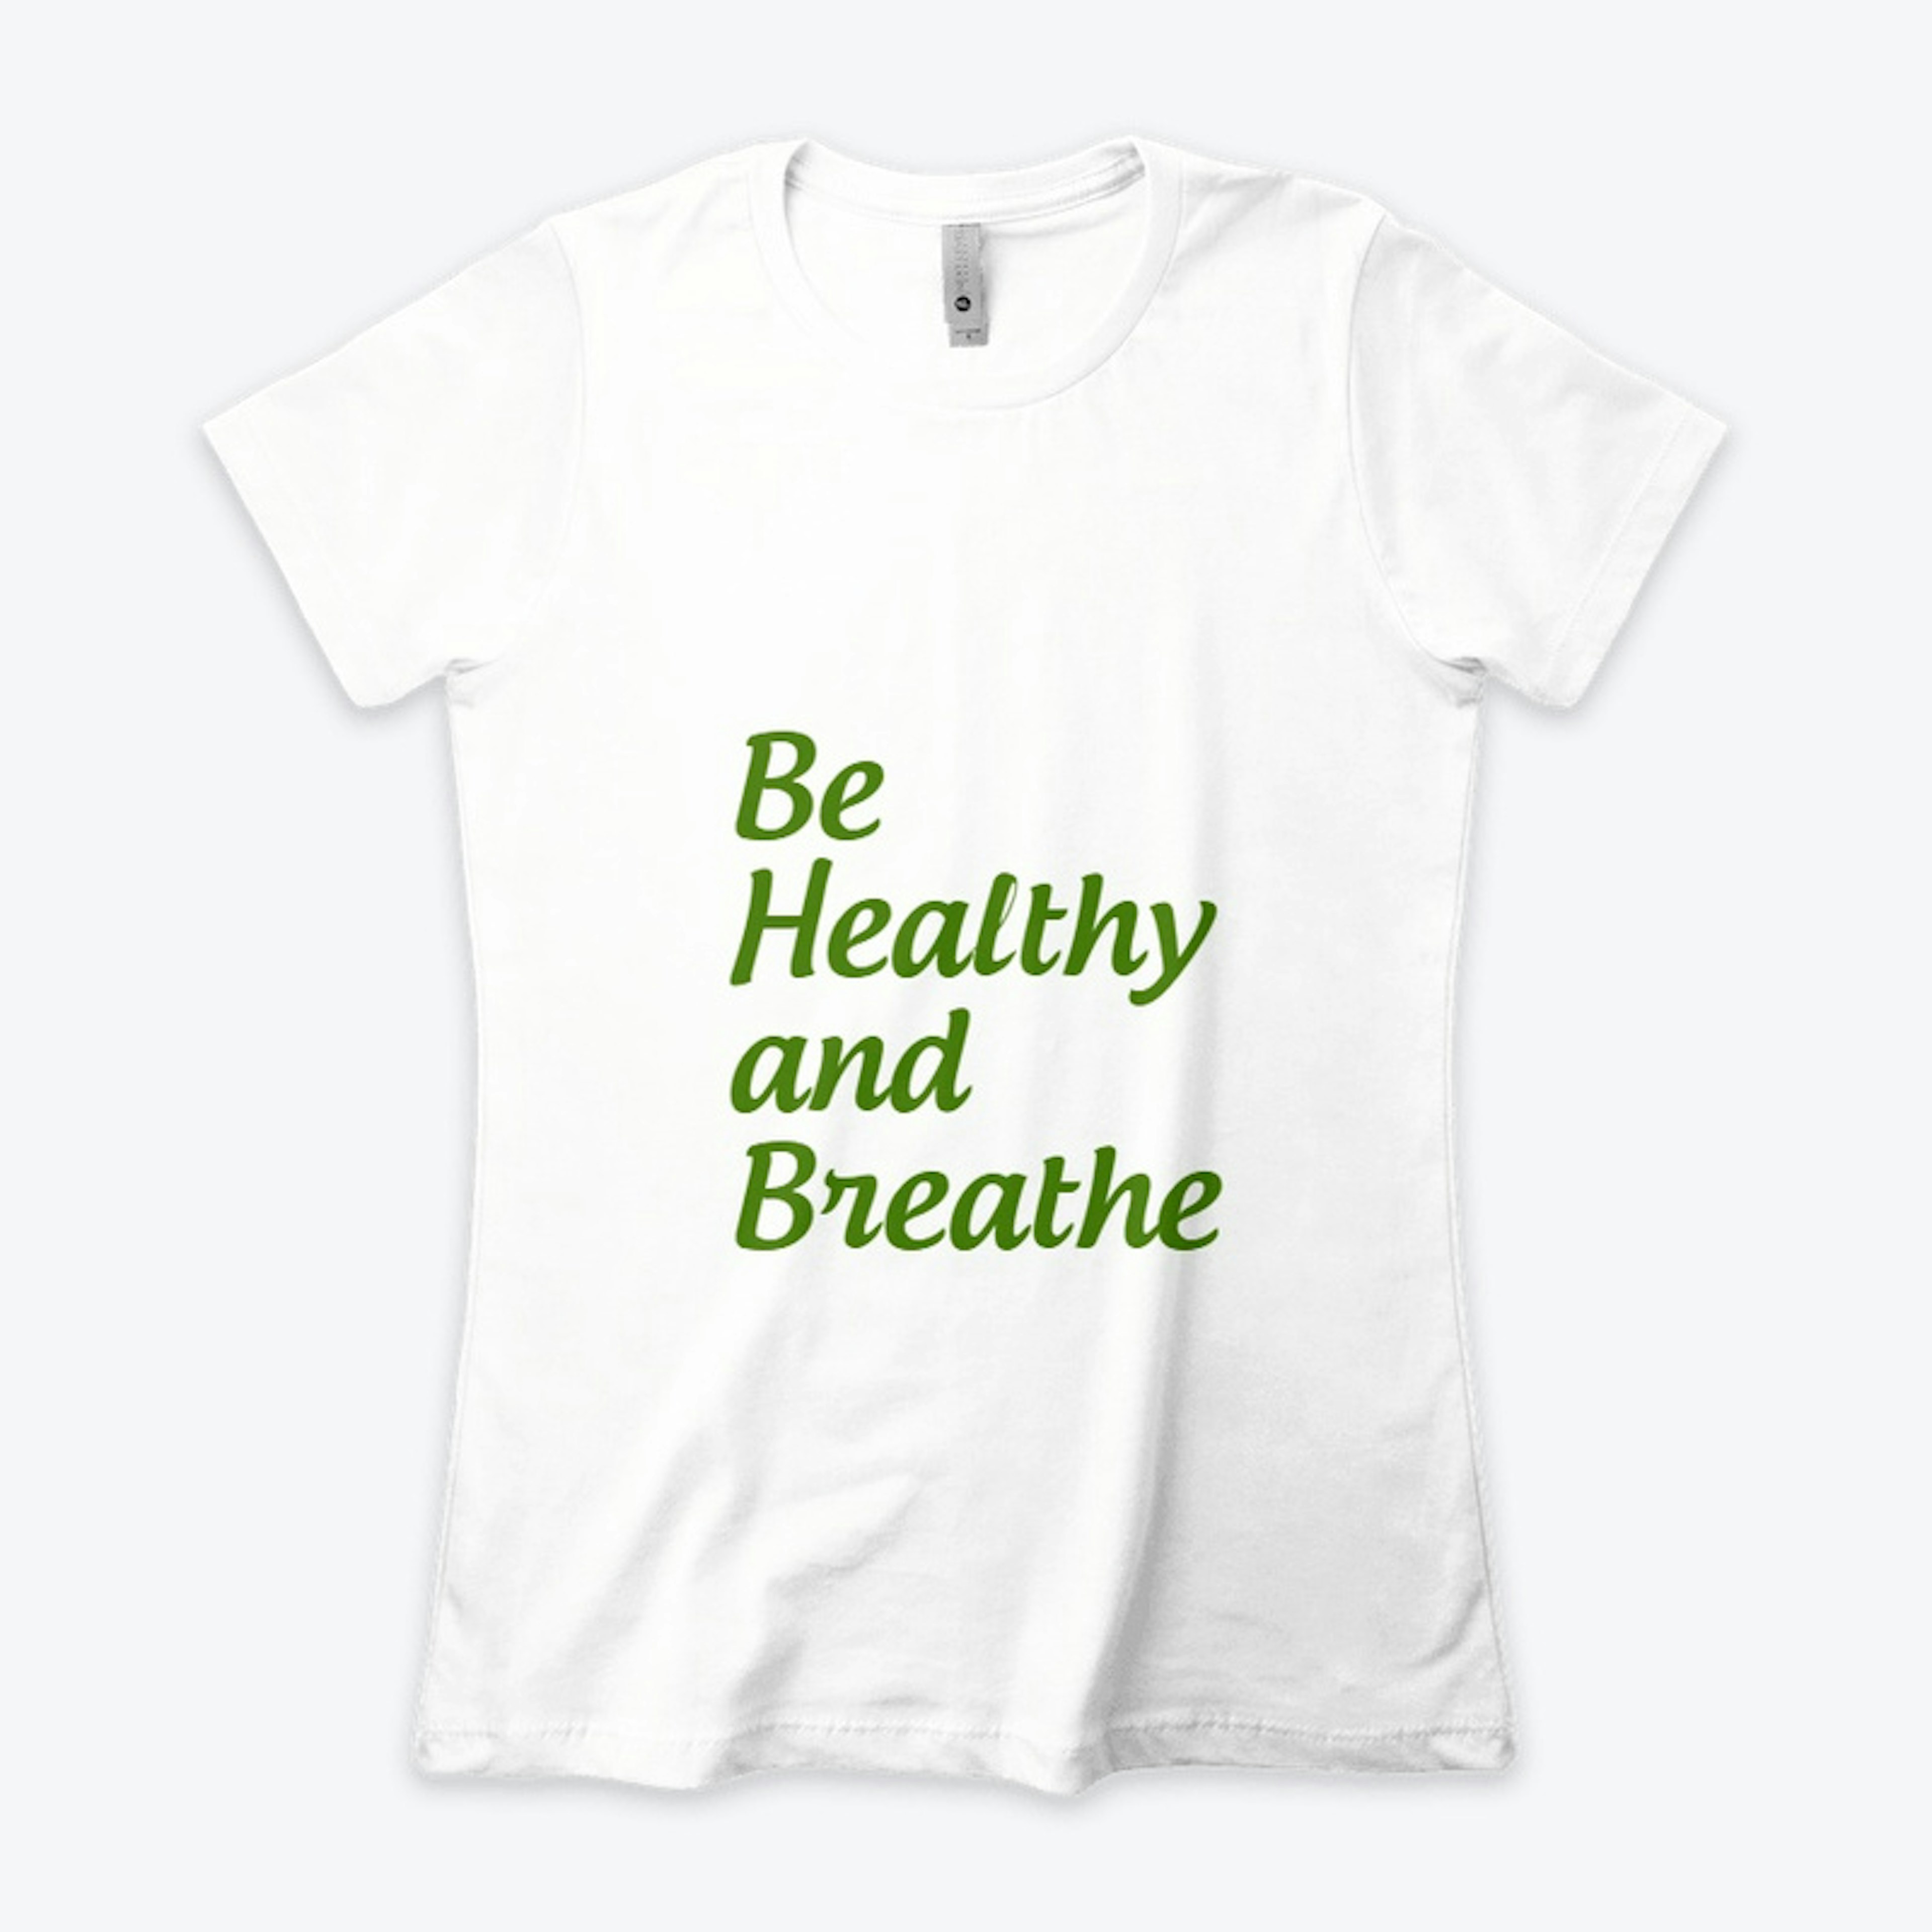 "Be Healthy and breathe" by Pharmaquiz